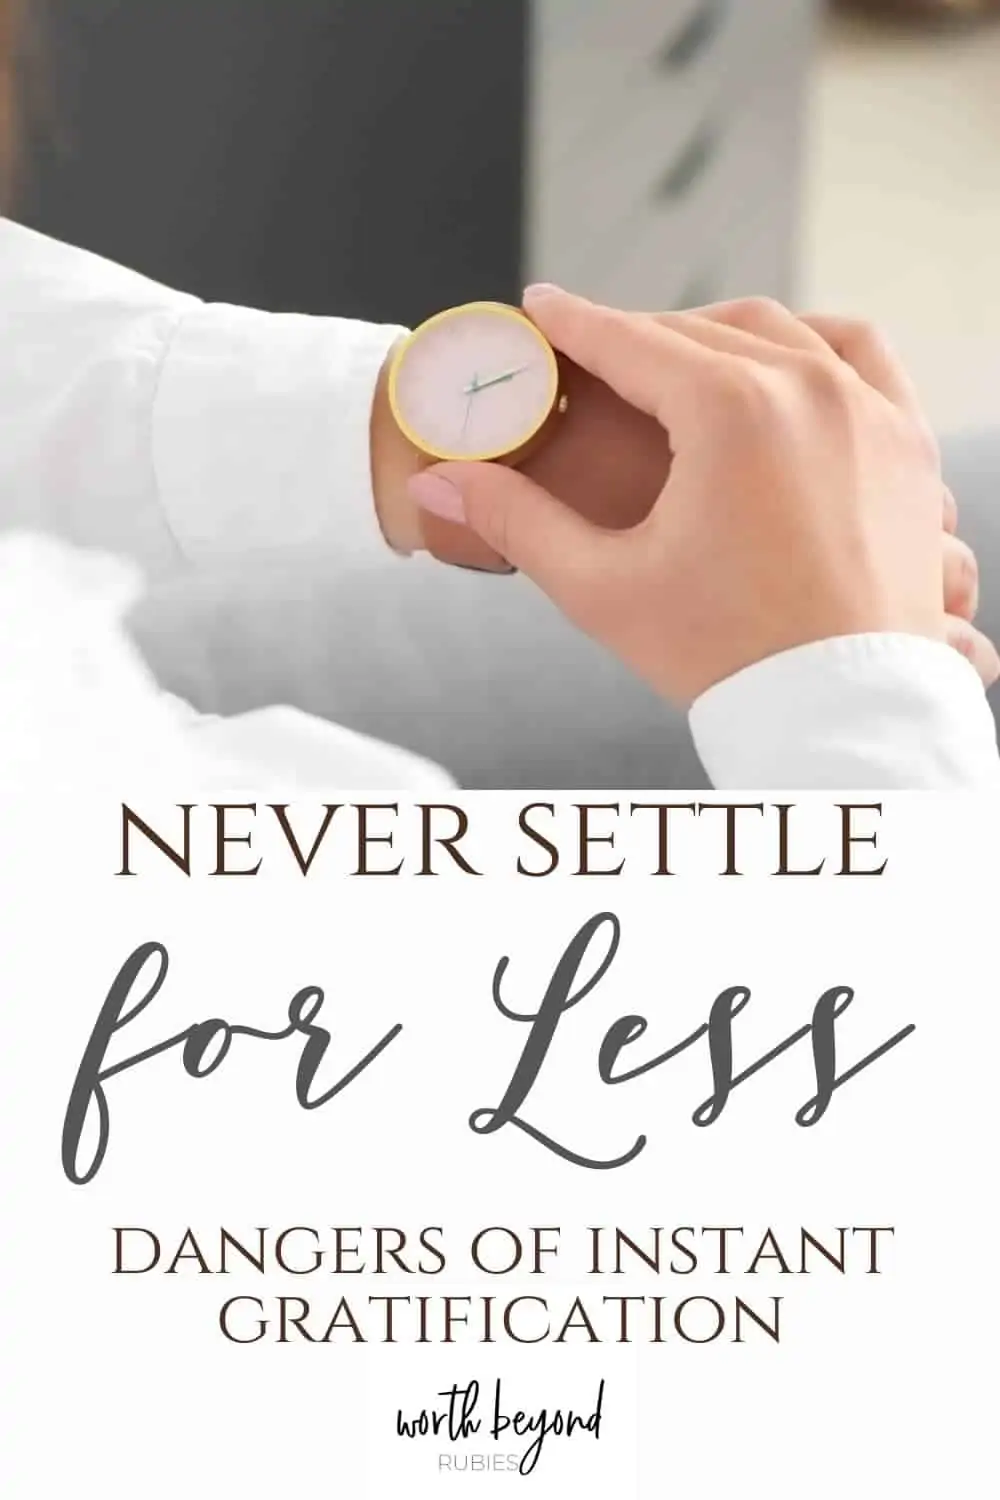 Young woman looking at watch in office - text overlay that says Never Settle for Less - Dangers of Instant Gratification